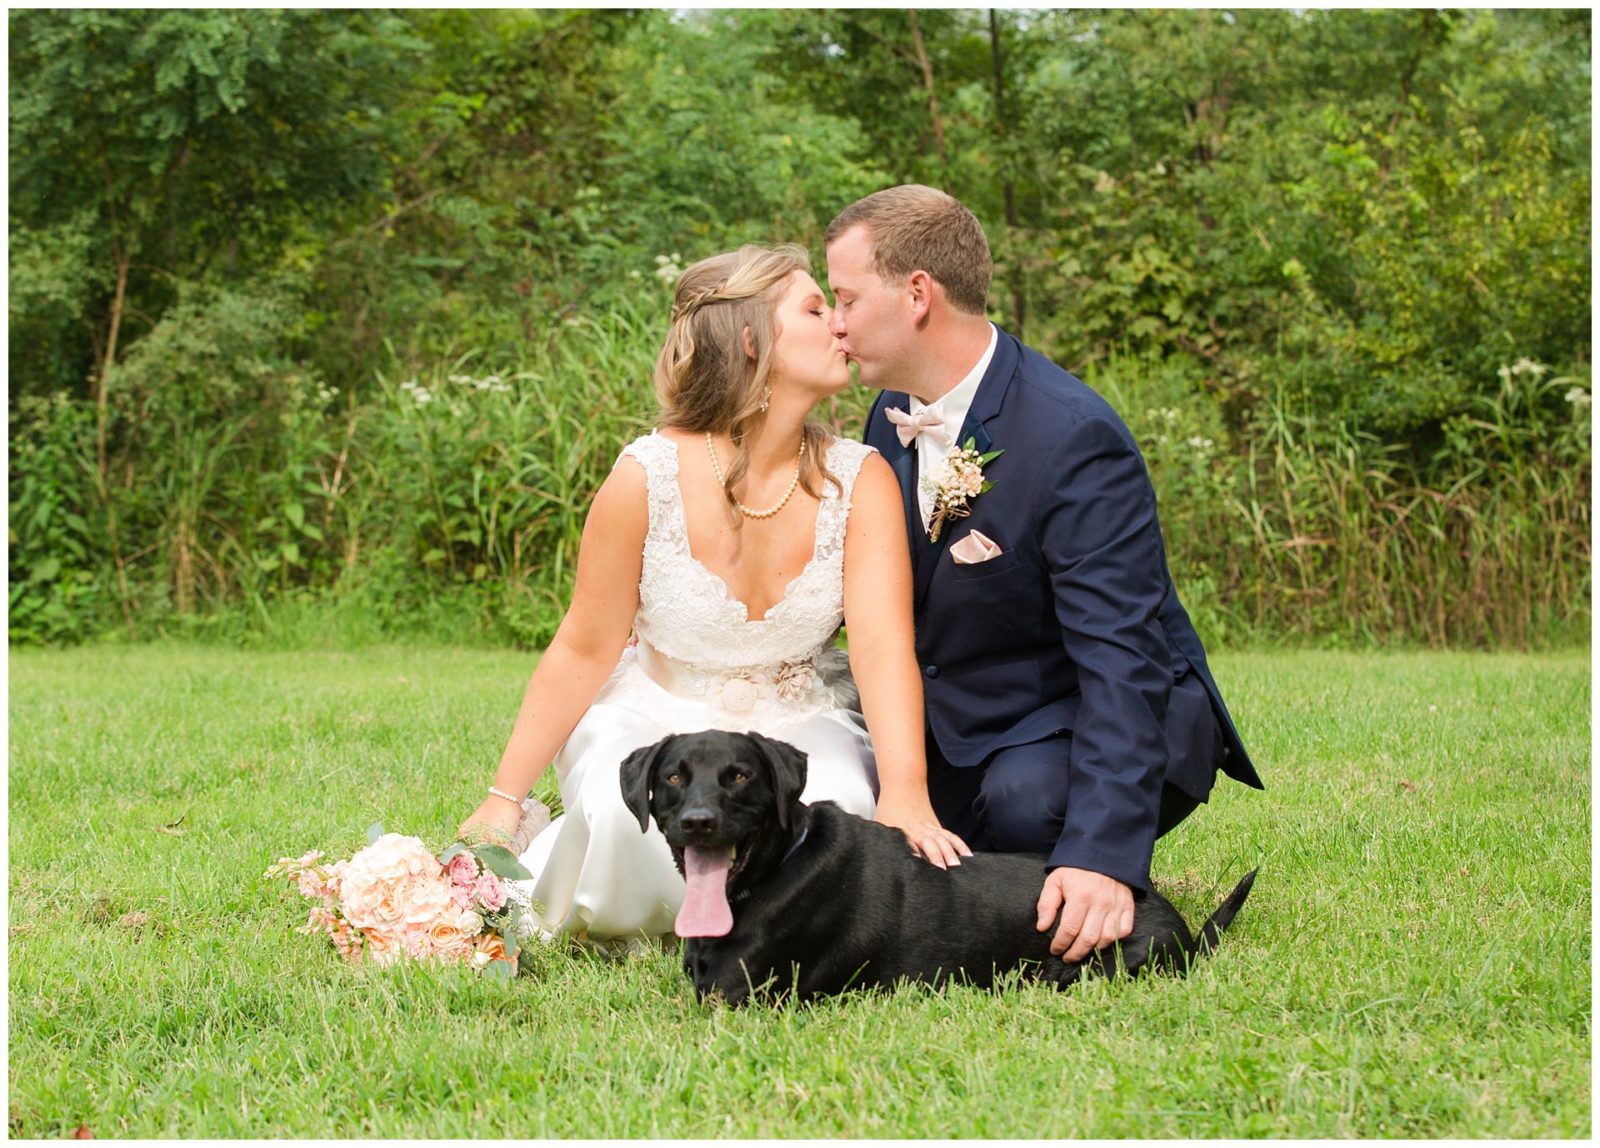 Wedding Bride and Groom Photos with a dog at the Barn at McCall Springs in Lawrenceburg, Kentucky.